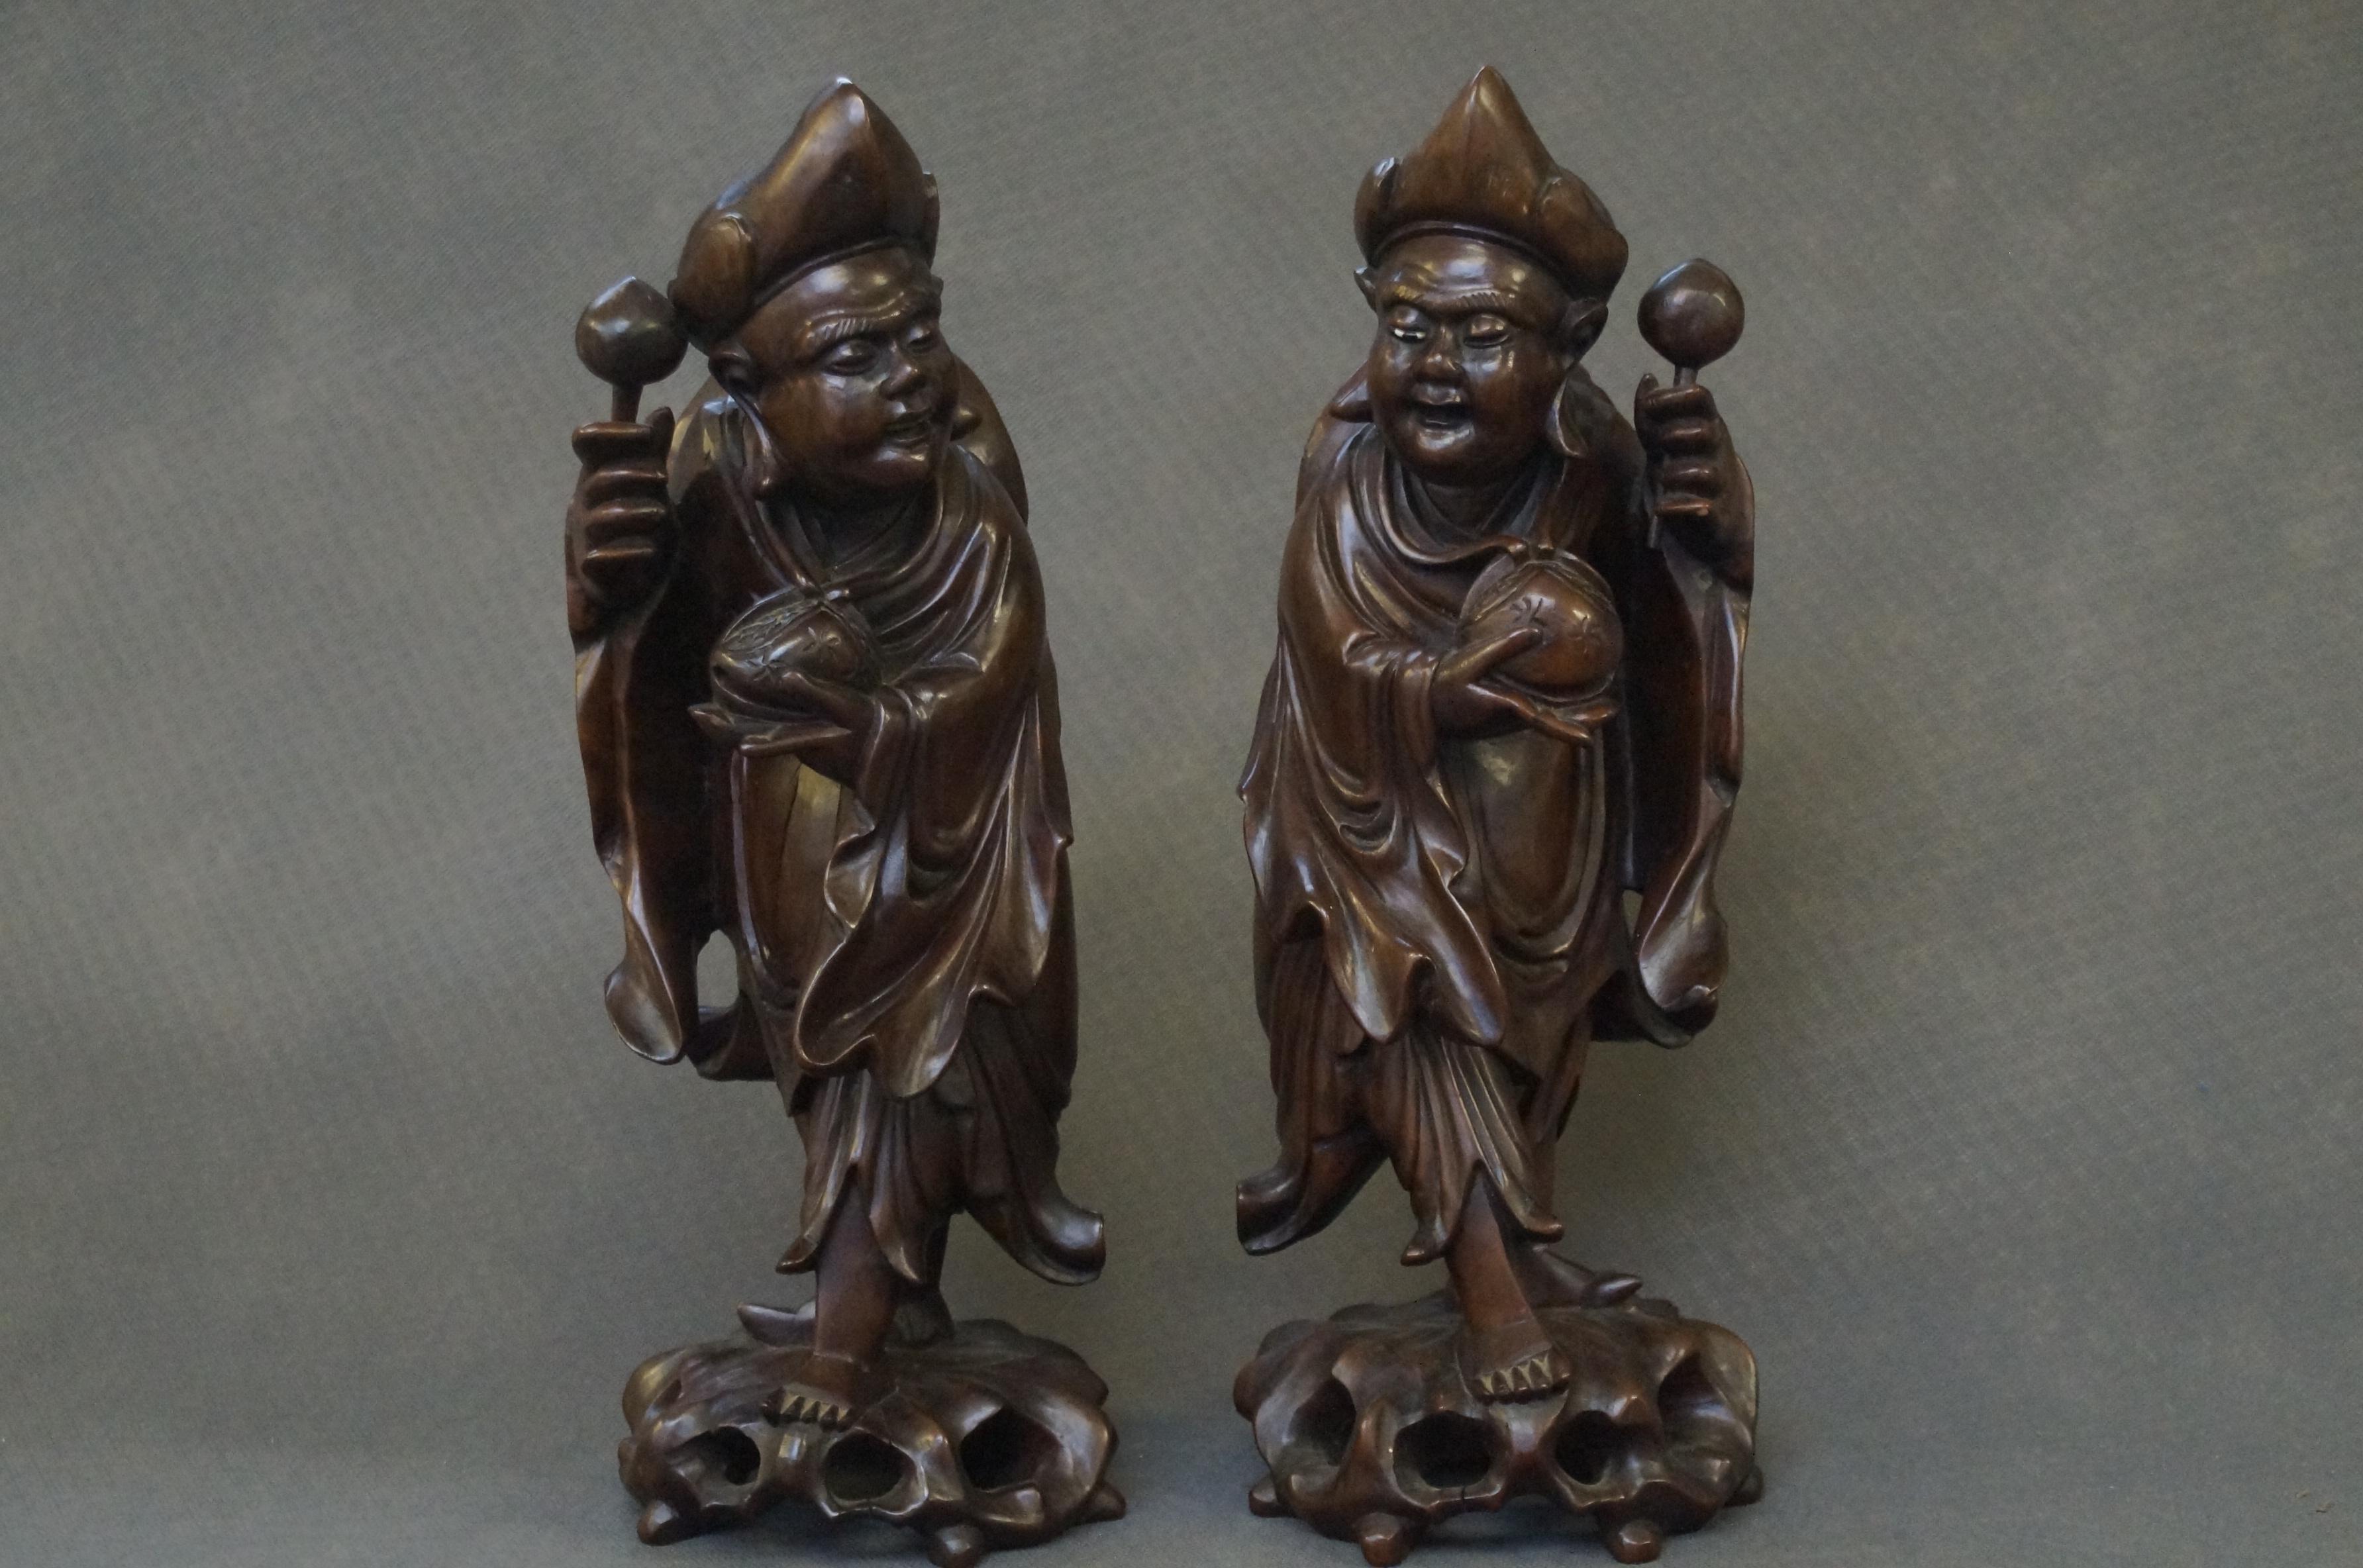 Pair of Oriental Wooden Carved Figures (both with